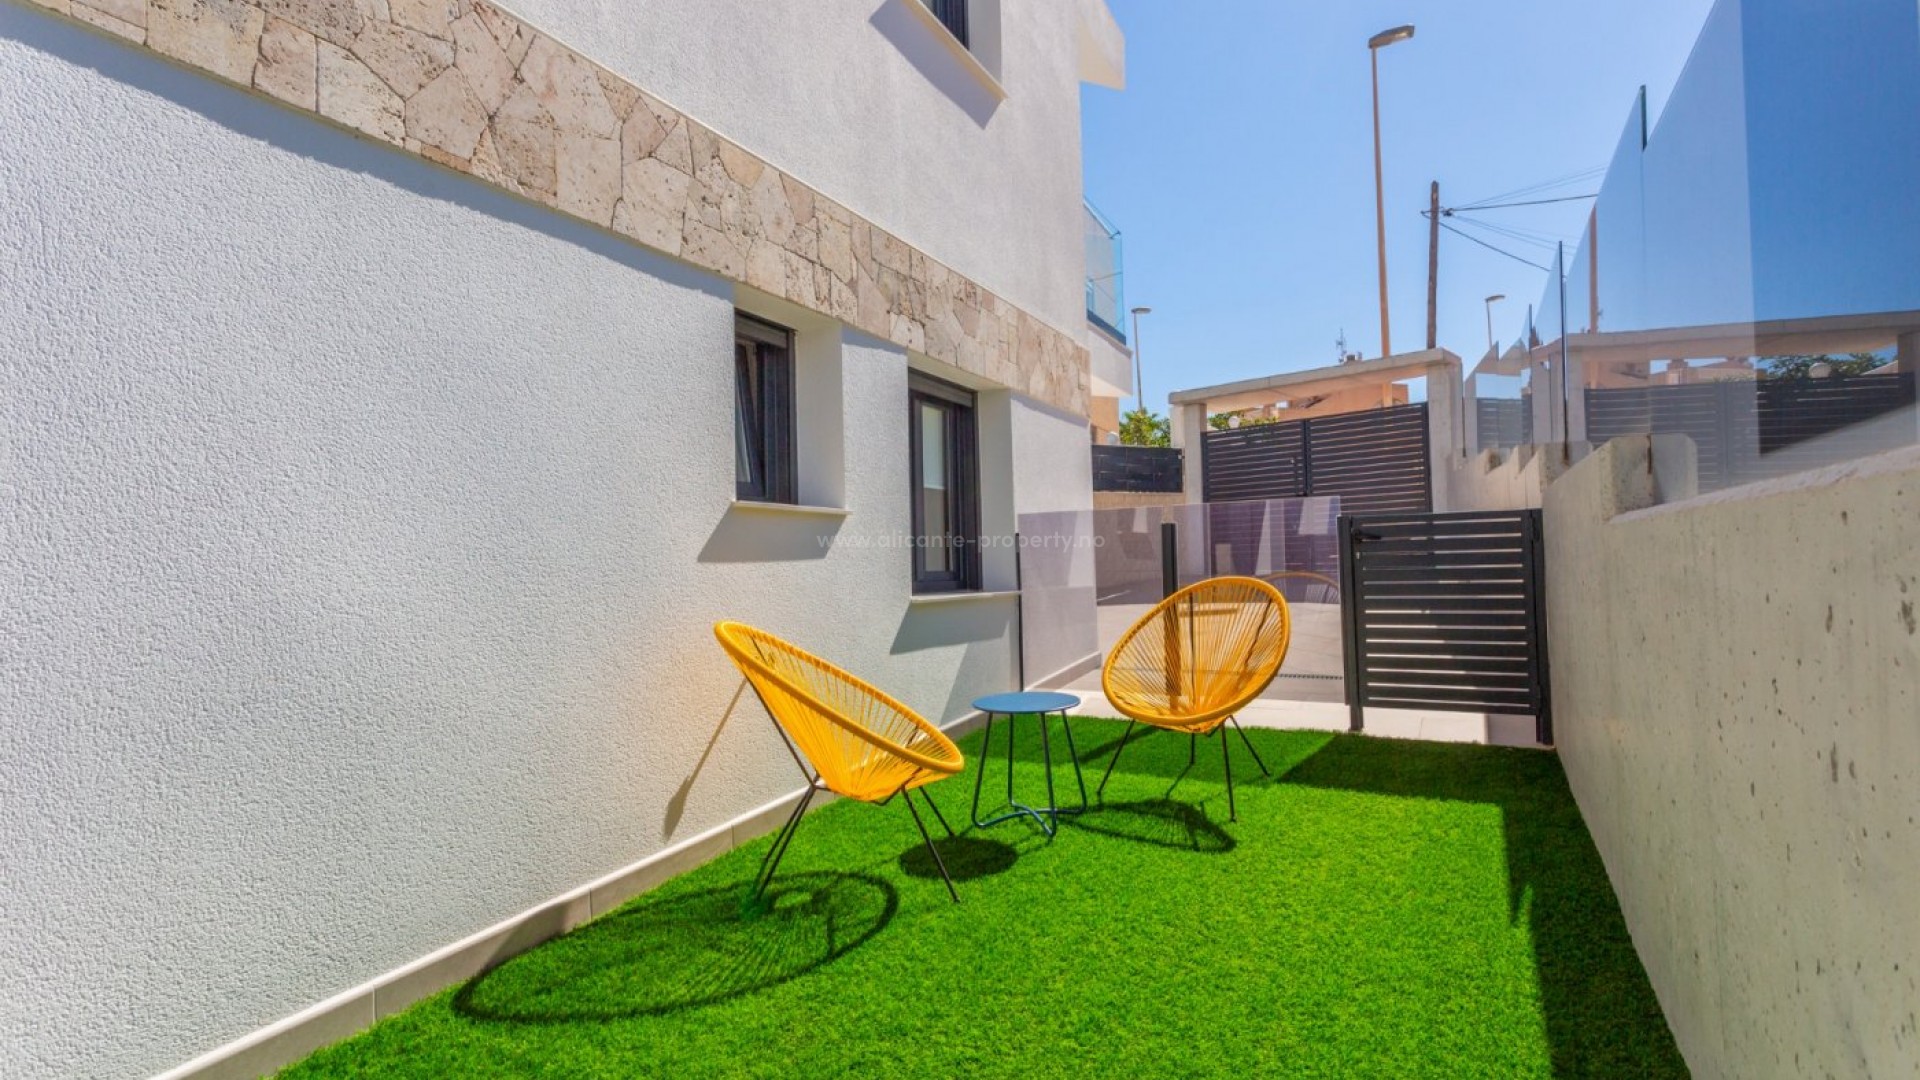 Villa/house on La Mata beach in Torrevieja, 3 bedrooms, 4 bathrooms, saltwater pool, terrace, solarium with hot tub and bar counter, finished half-basement